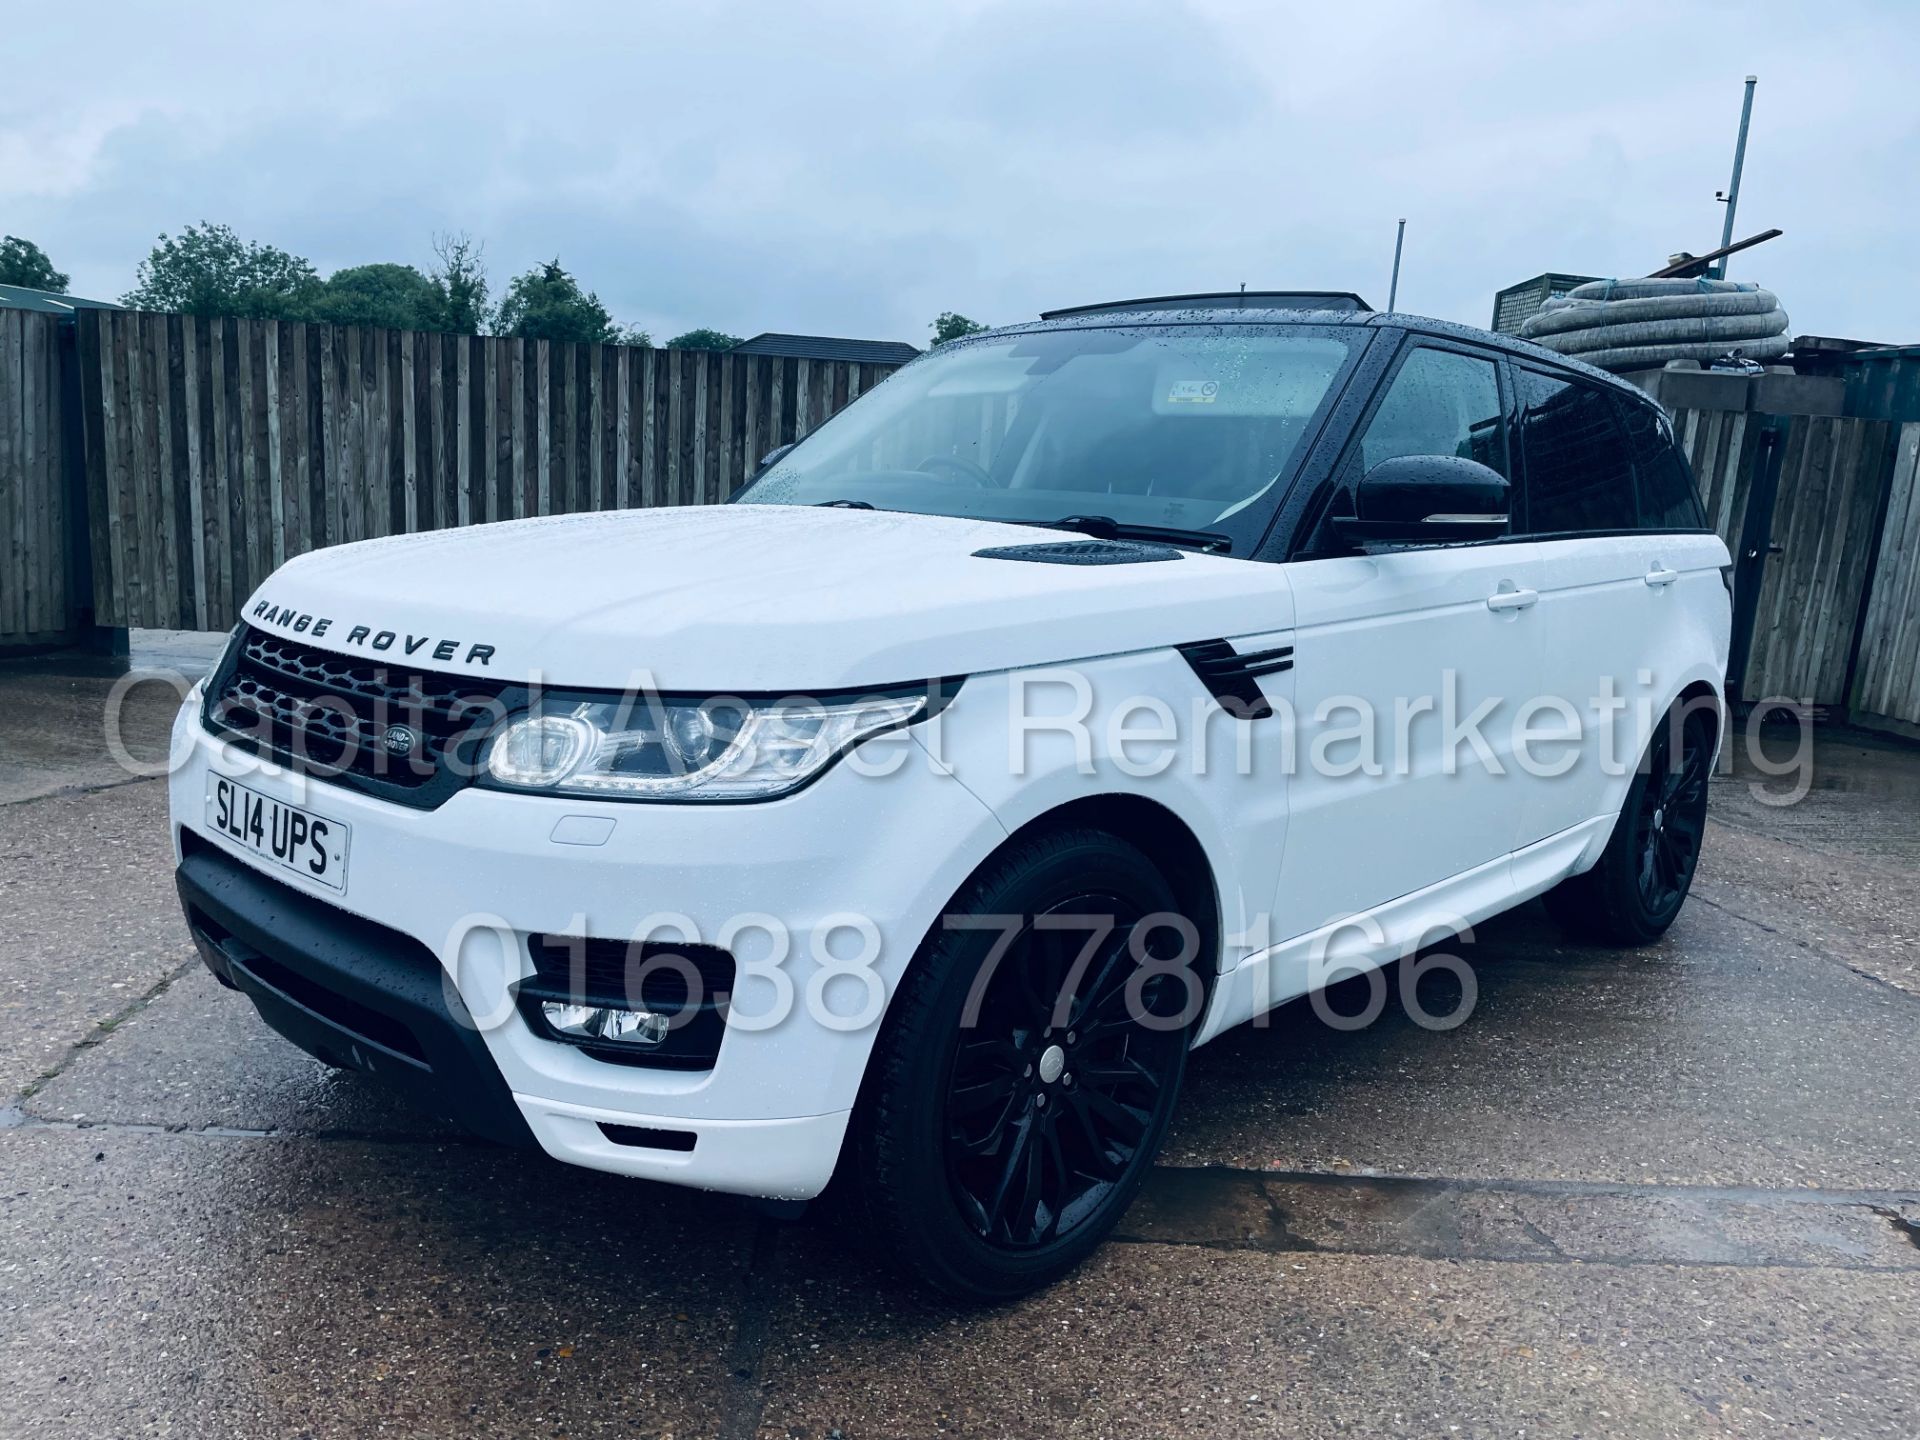 (On Sale) RANGE ROVER SPORT *SPECIAL EDITION* (2014 - FACELIFT) '3.0 TDV6 - AUTO' *NAV & PAN ROOF* - Image 5 of 54